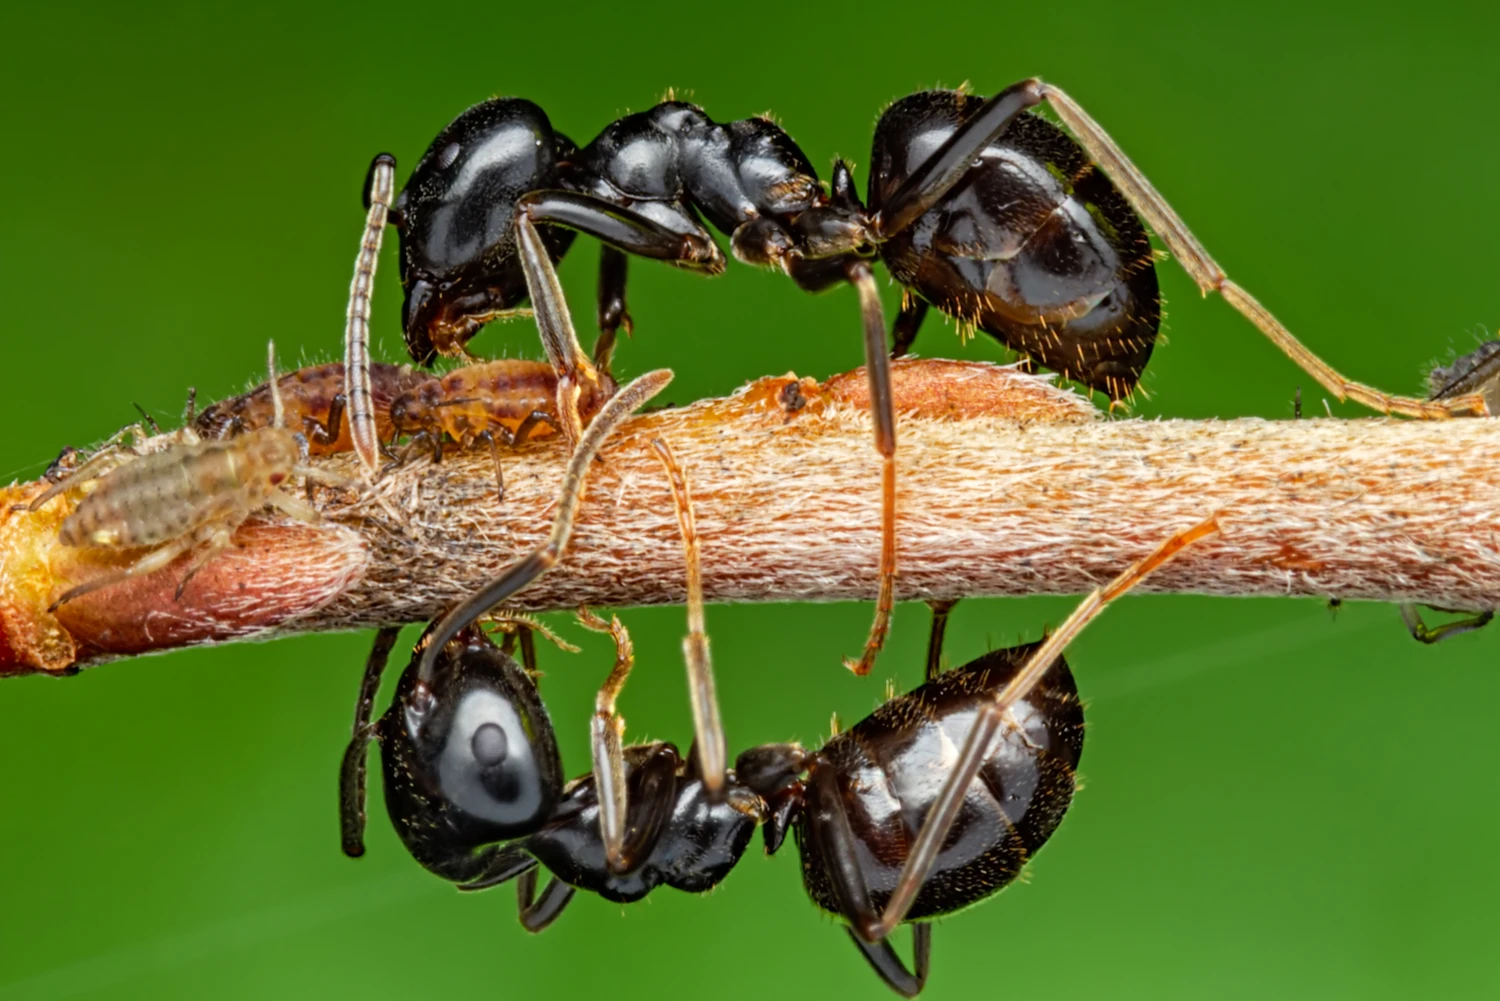 Ants Can Aid Early Cancer Detection— Scientists